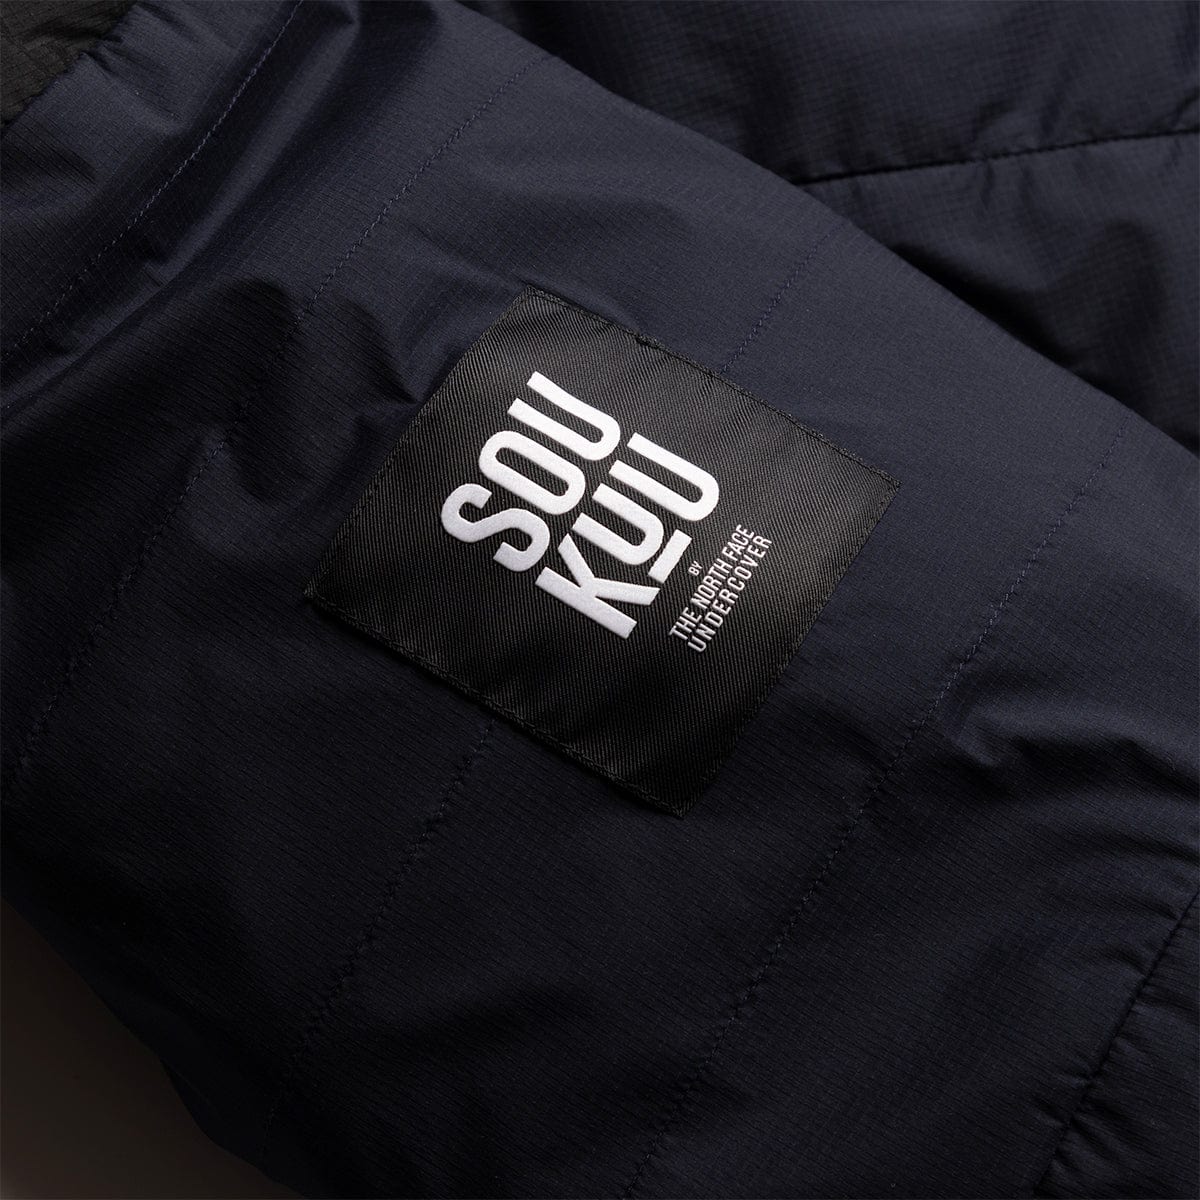 SOUKUU BY THE NORTH FACE X UNDERCOVER PROJECT 50-50 MOUNTAIN JACKET